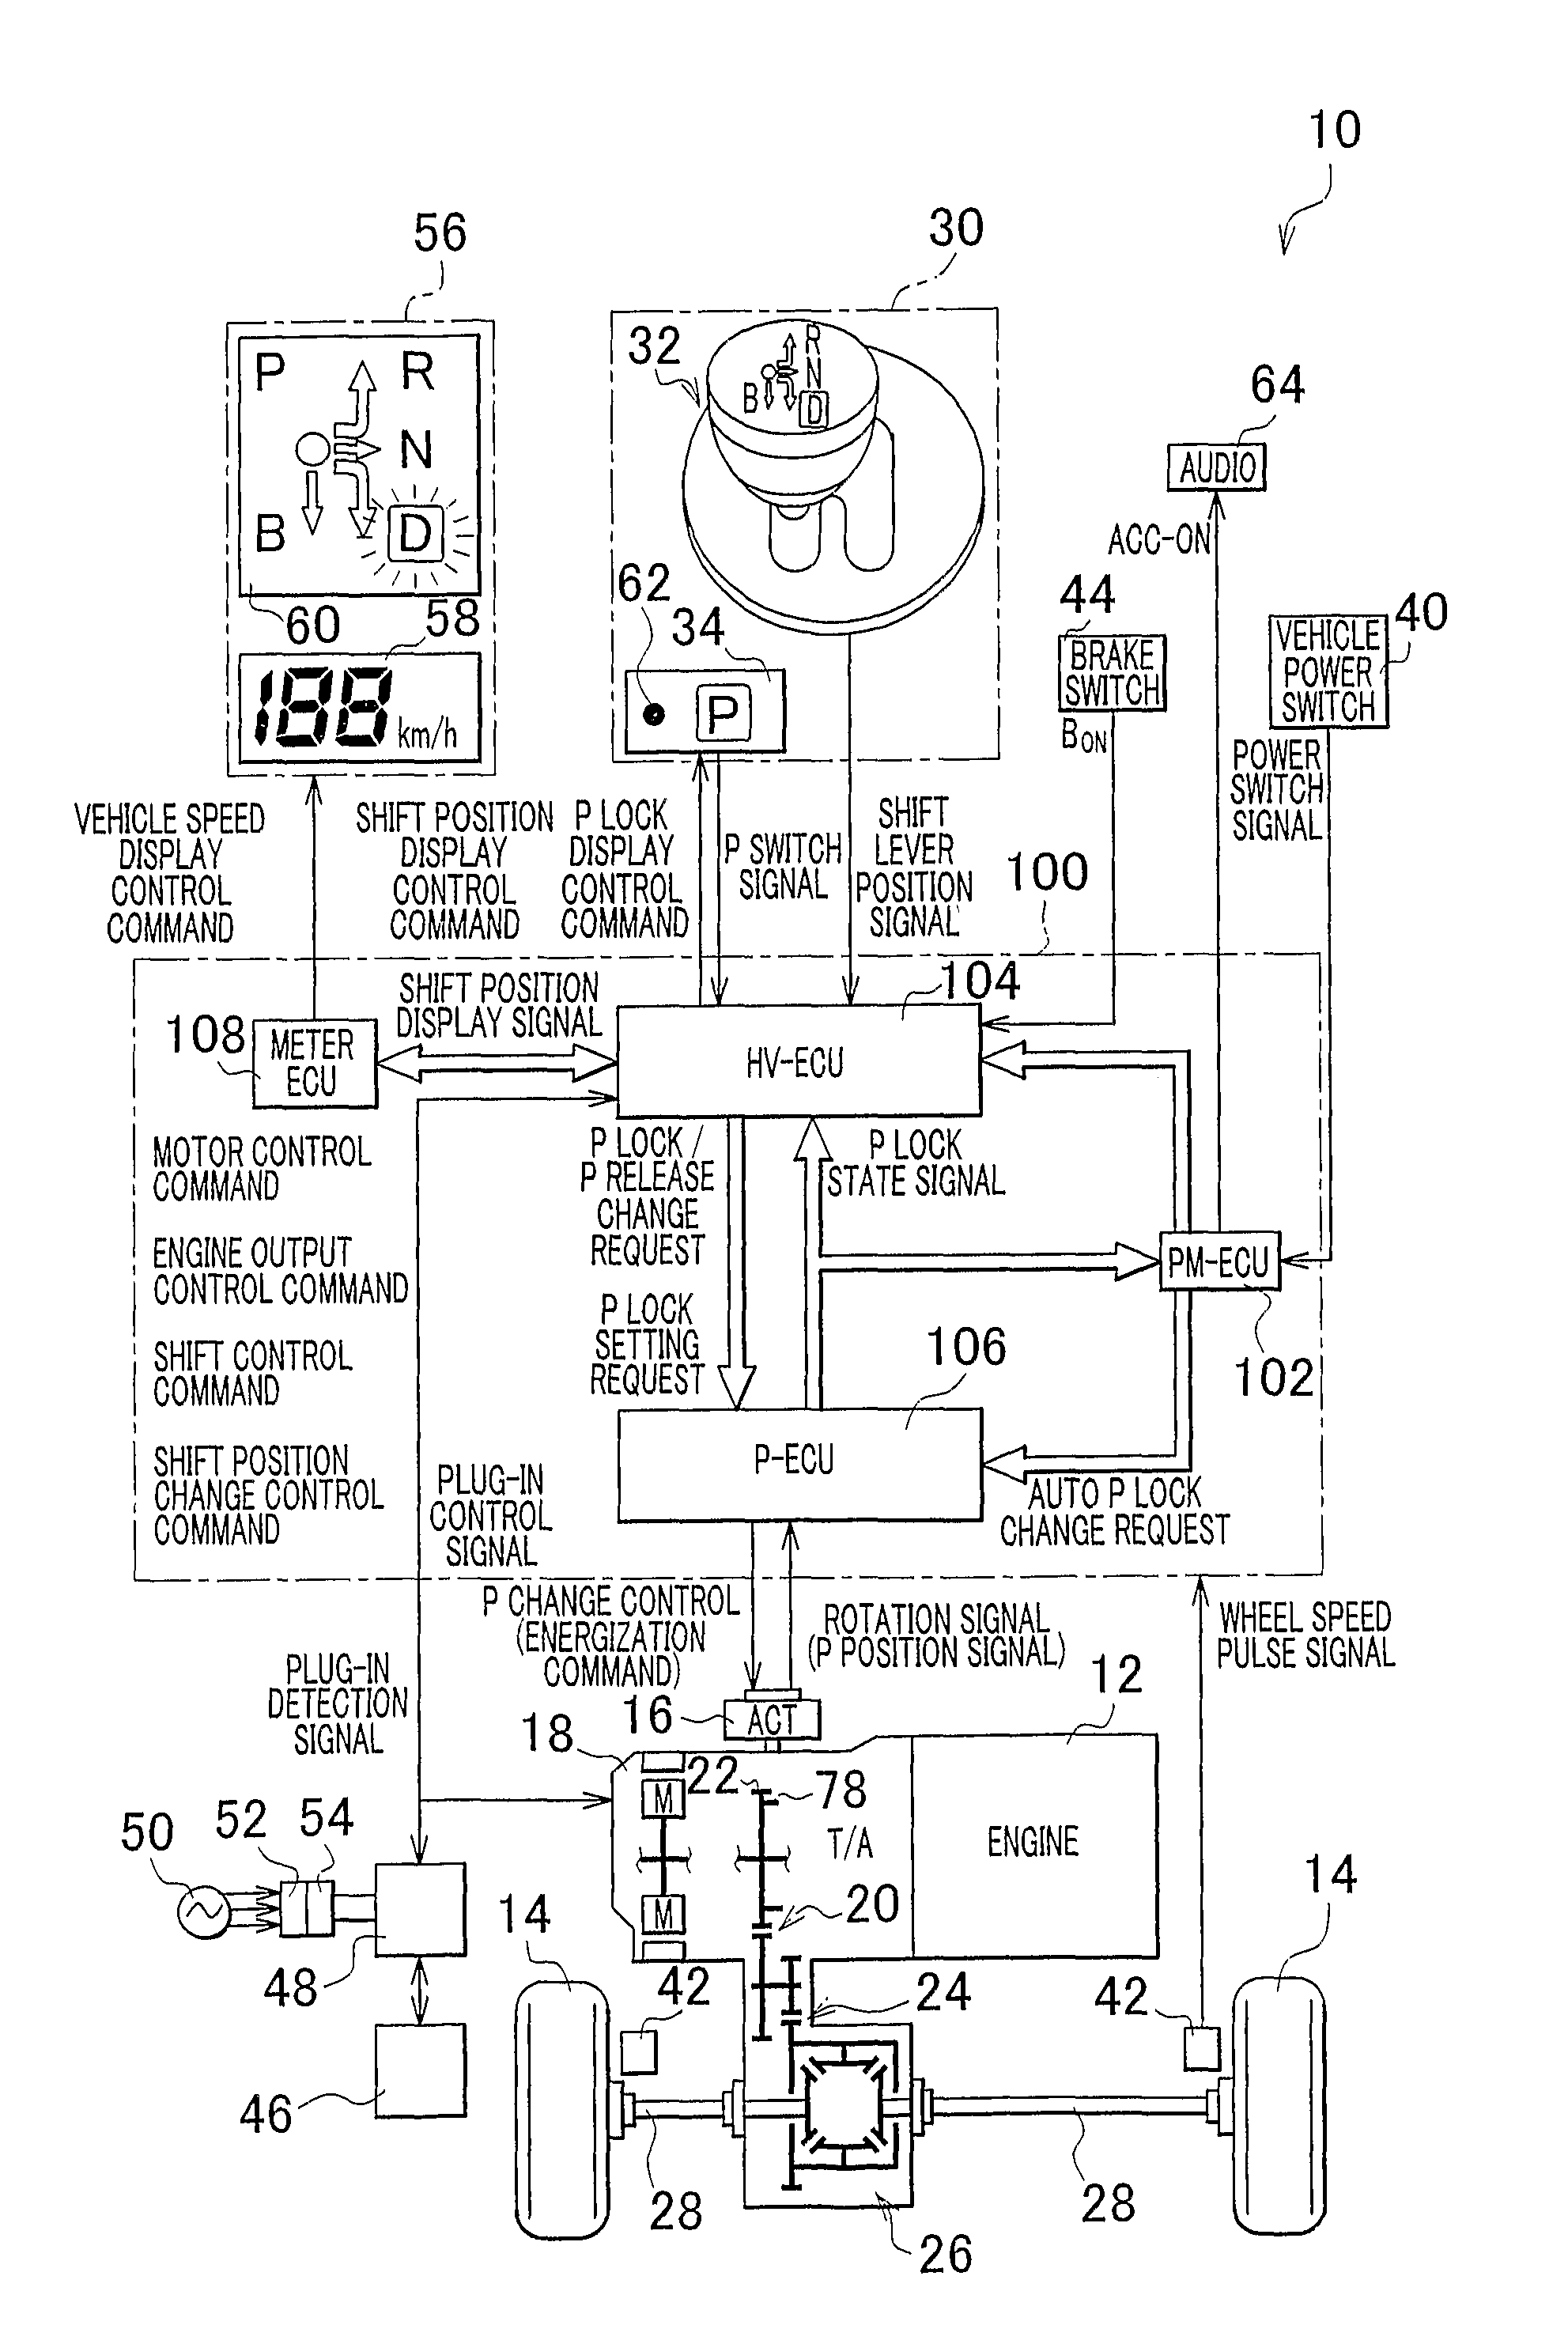 Vehicle shift control system